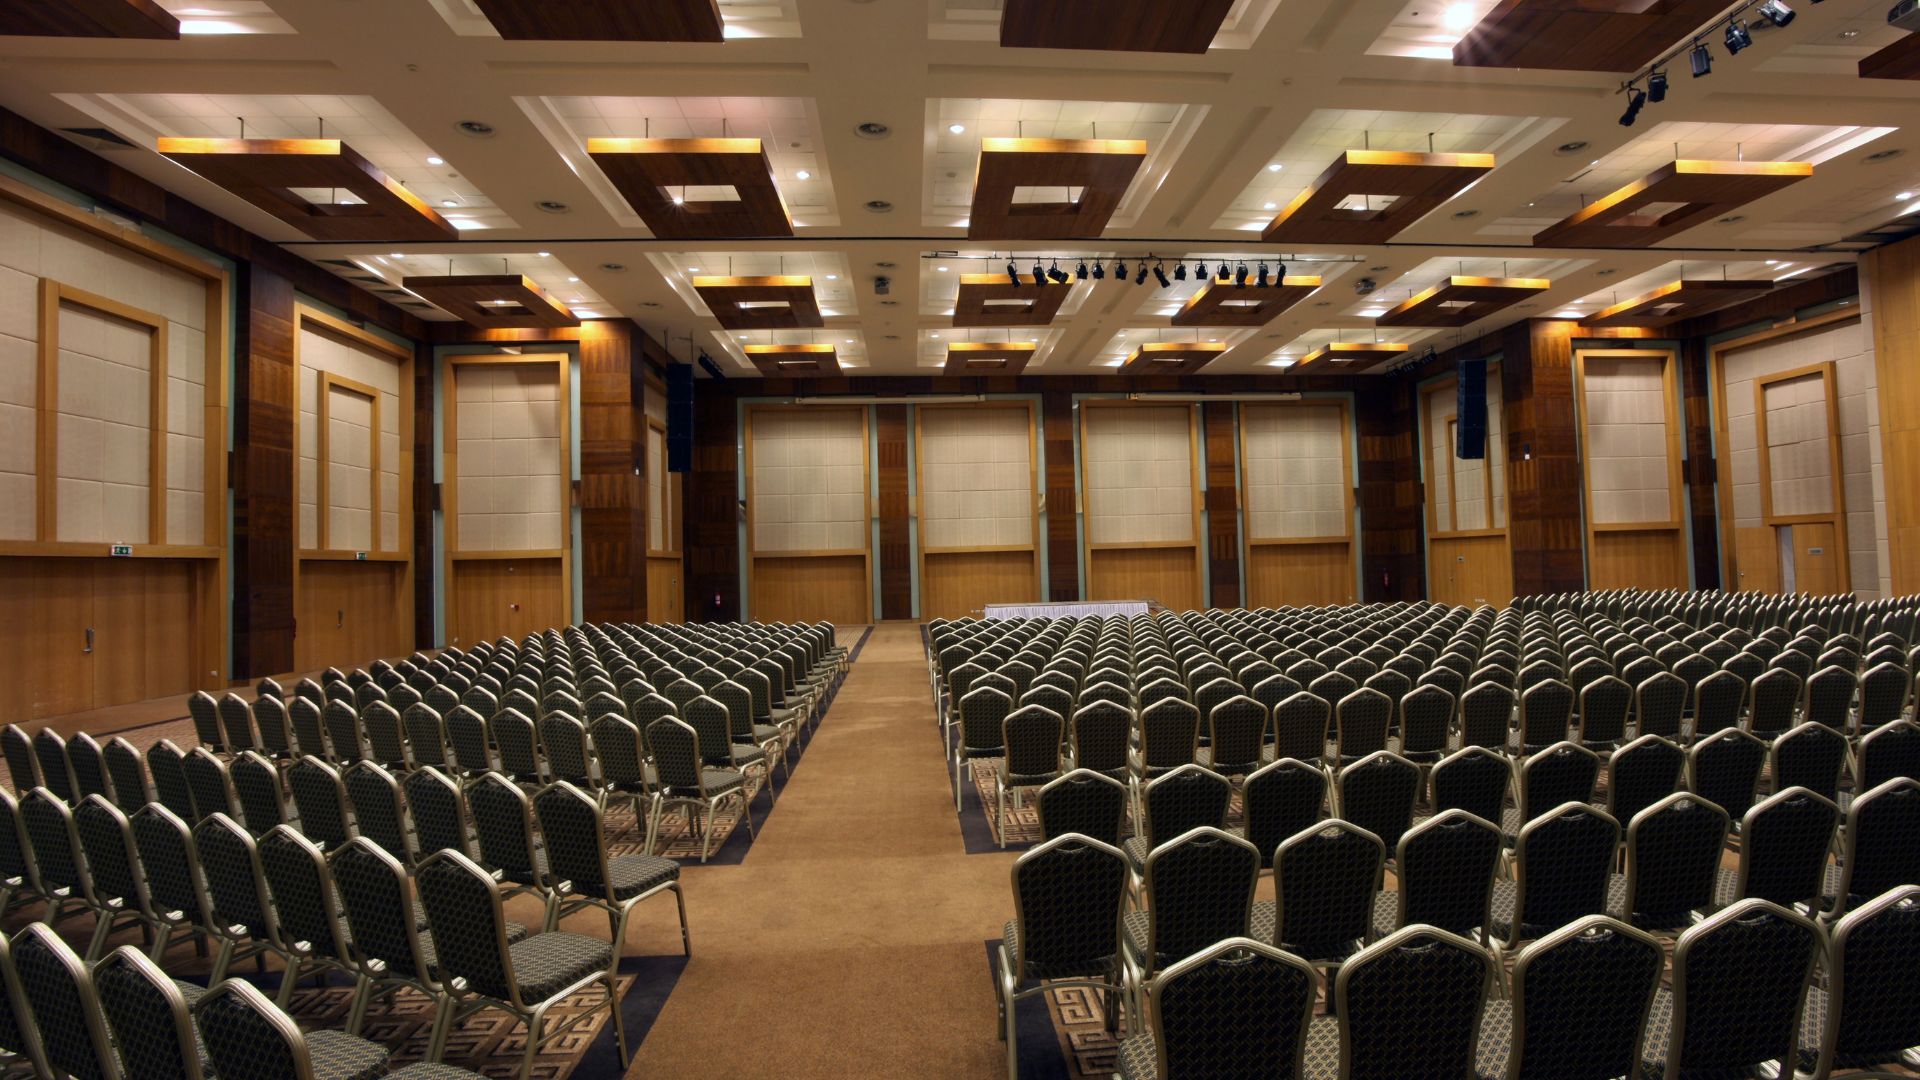 World class facility suitable for conferences of all kinds and occasions